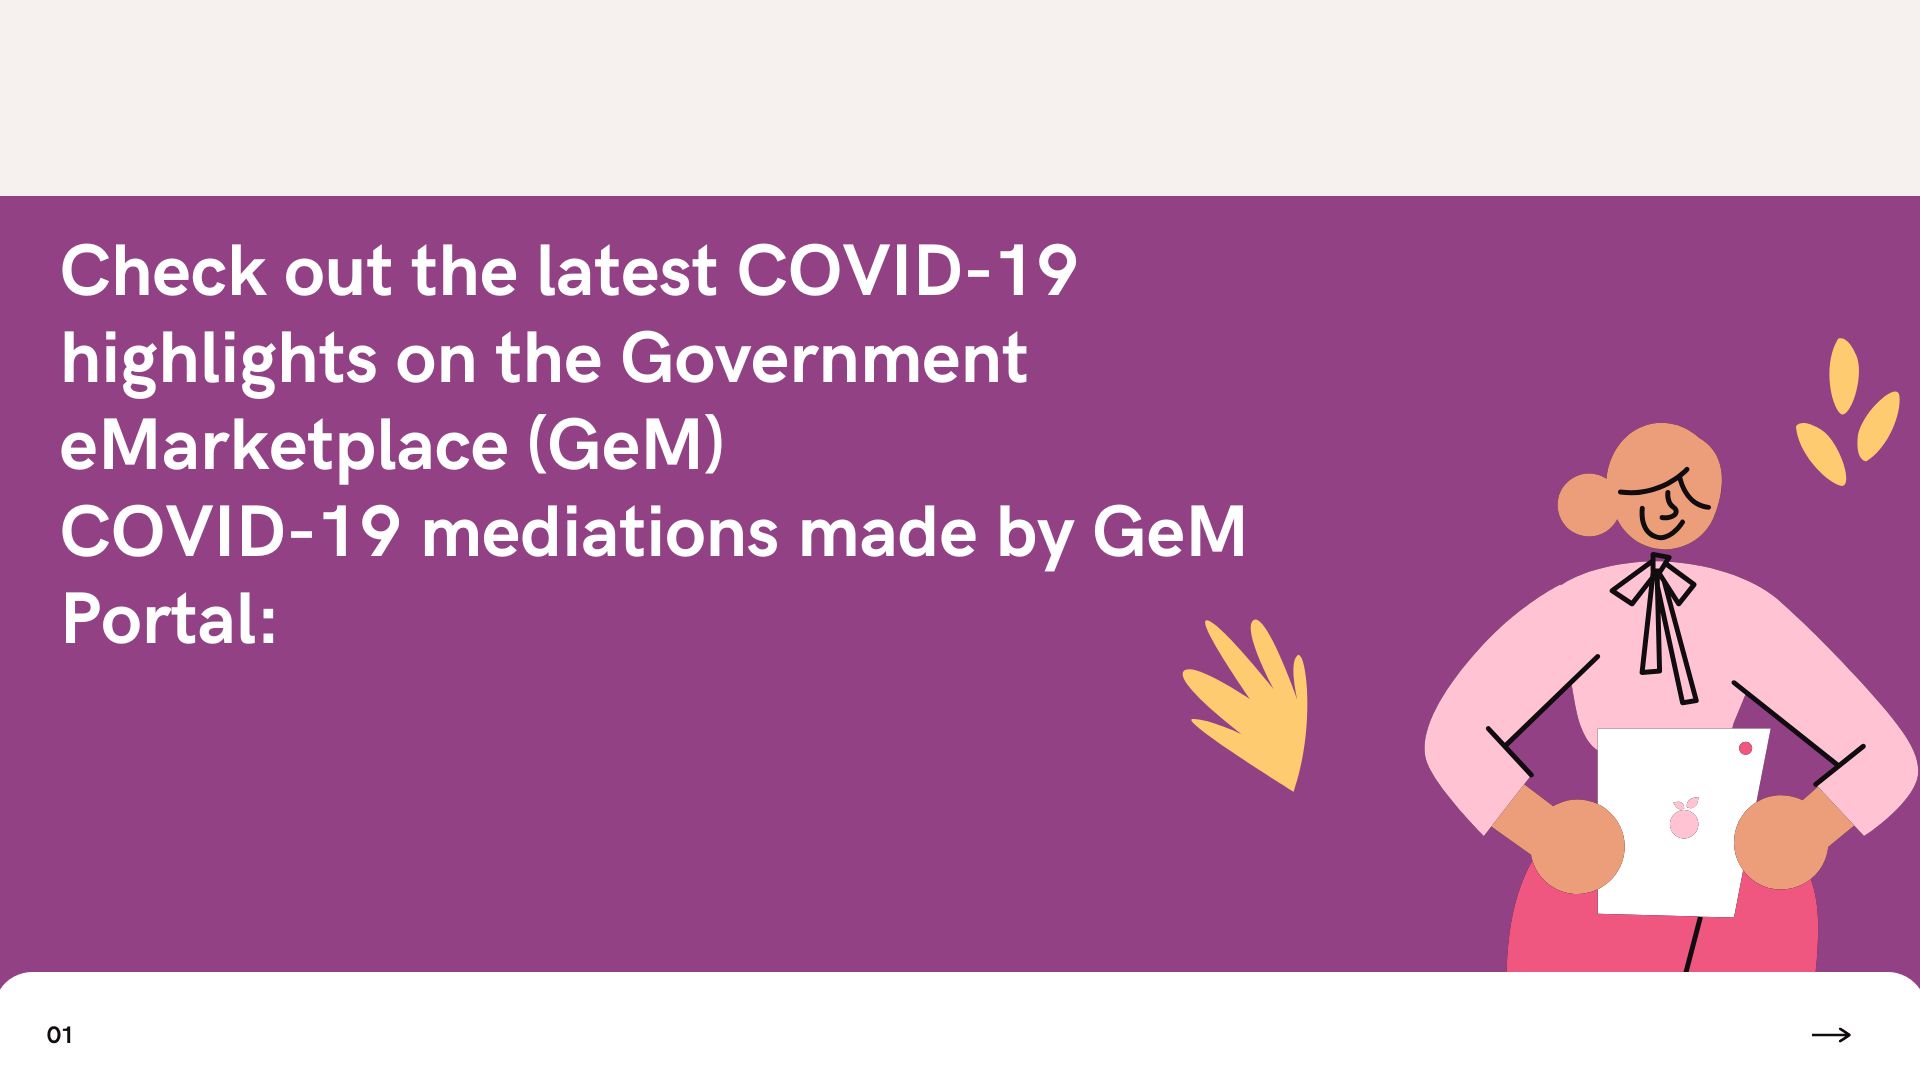 Check out the latest COVID-19 highlights on the Government eMarketplace (GeM) COVID-19 mediations made by GeM Portal